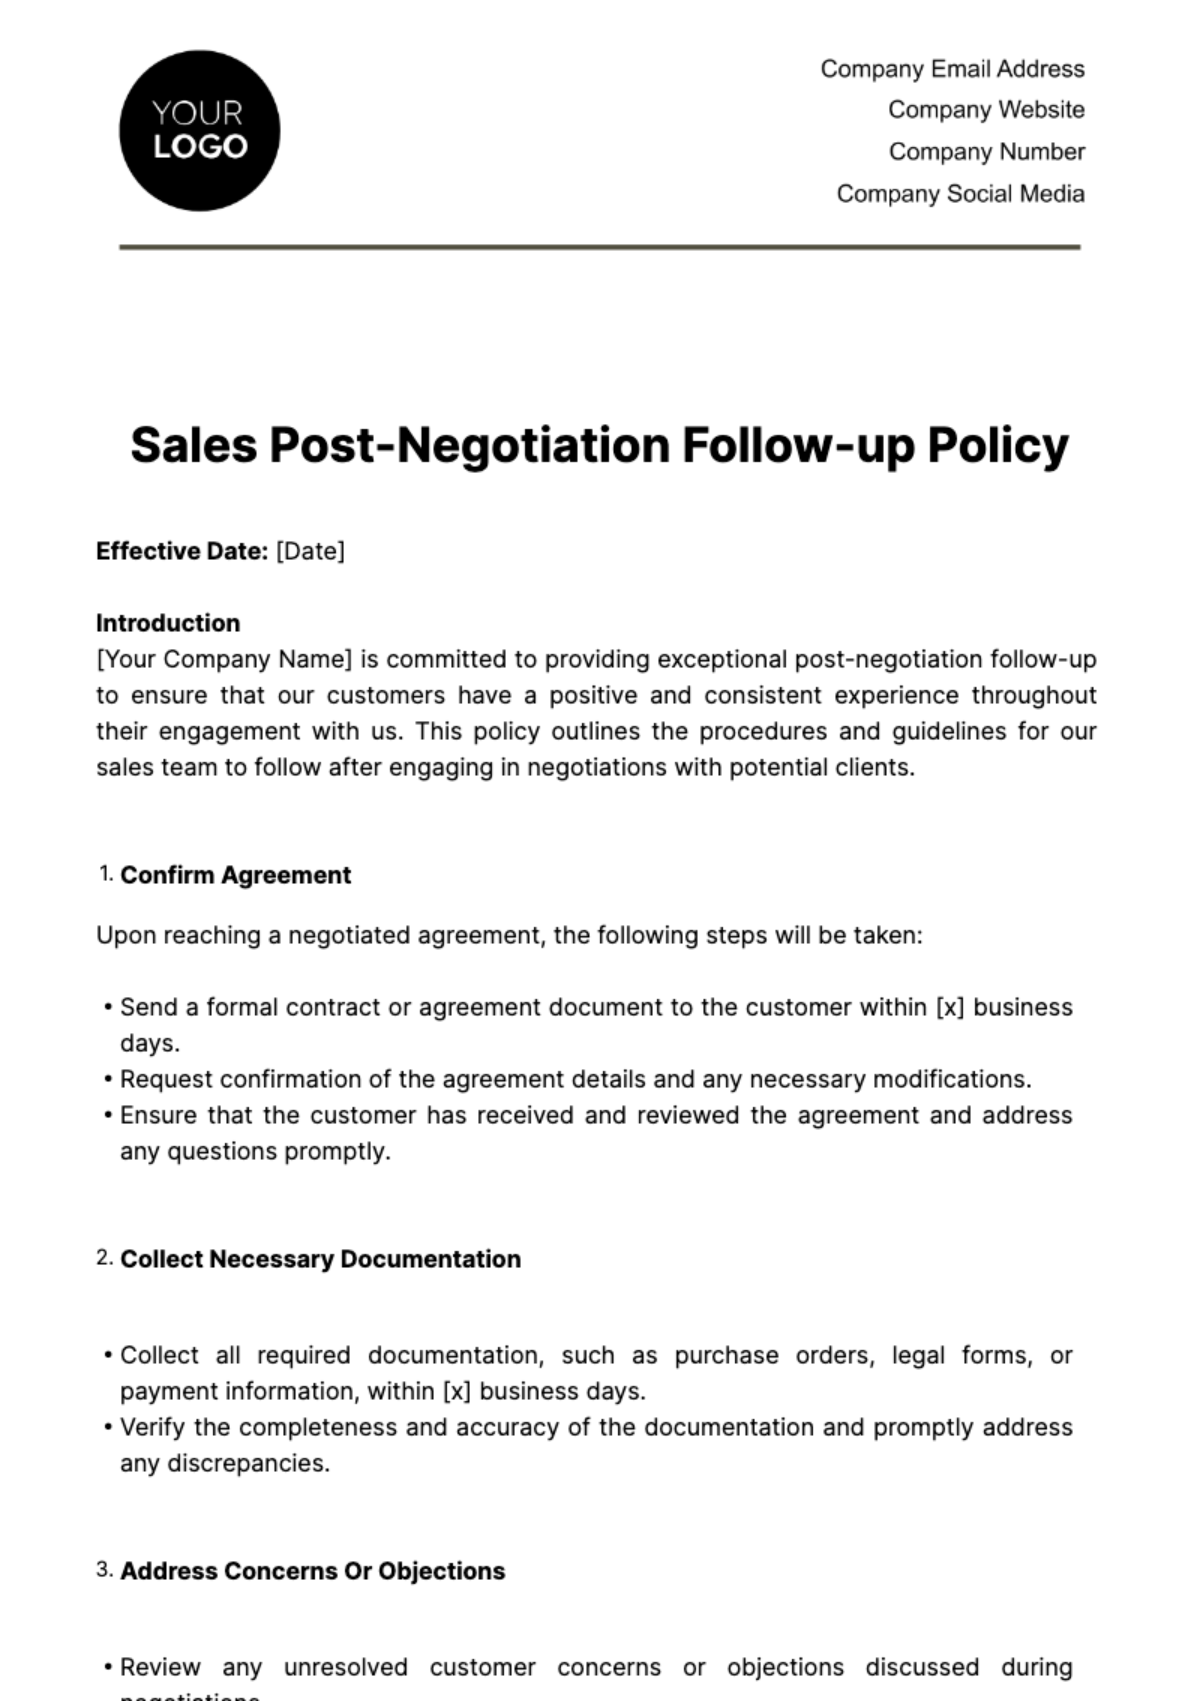 Sales Post-Negotiation Follow-up Policy Template